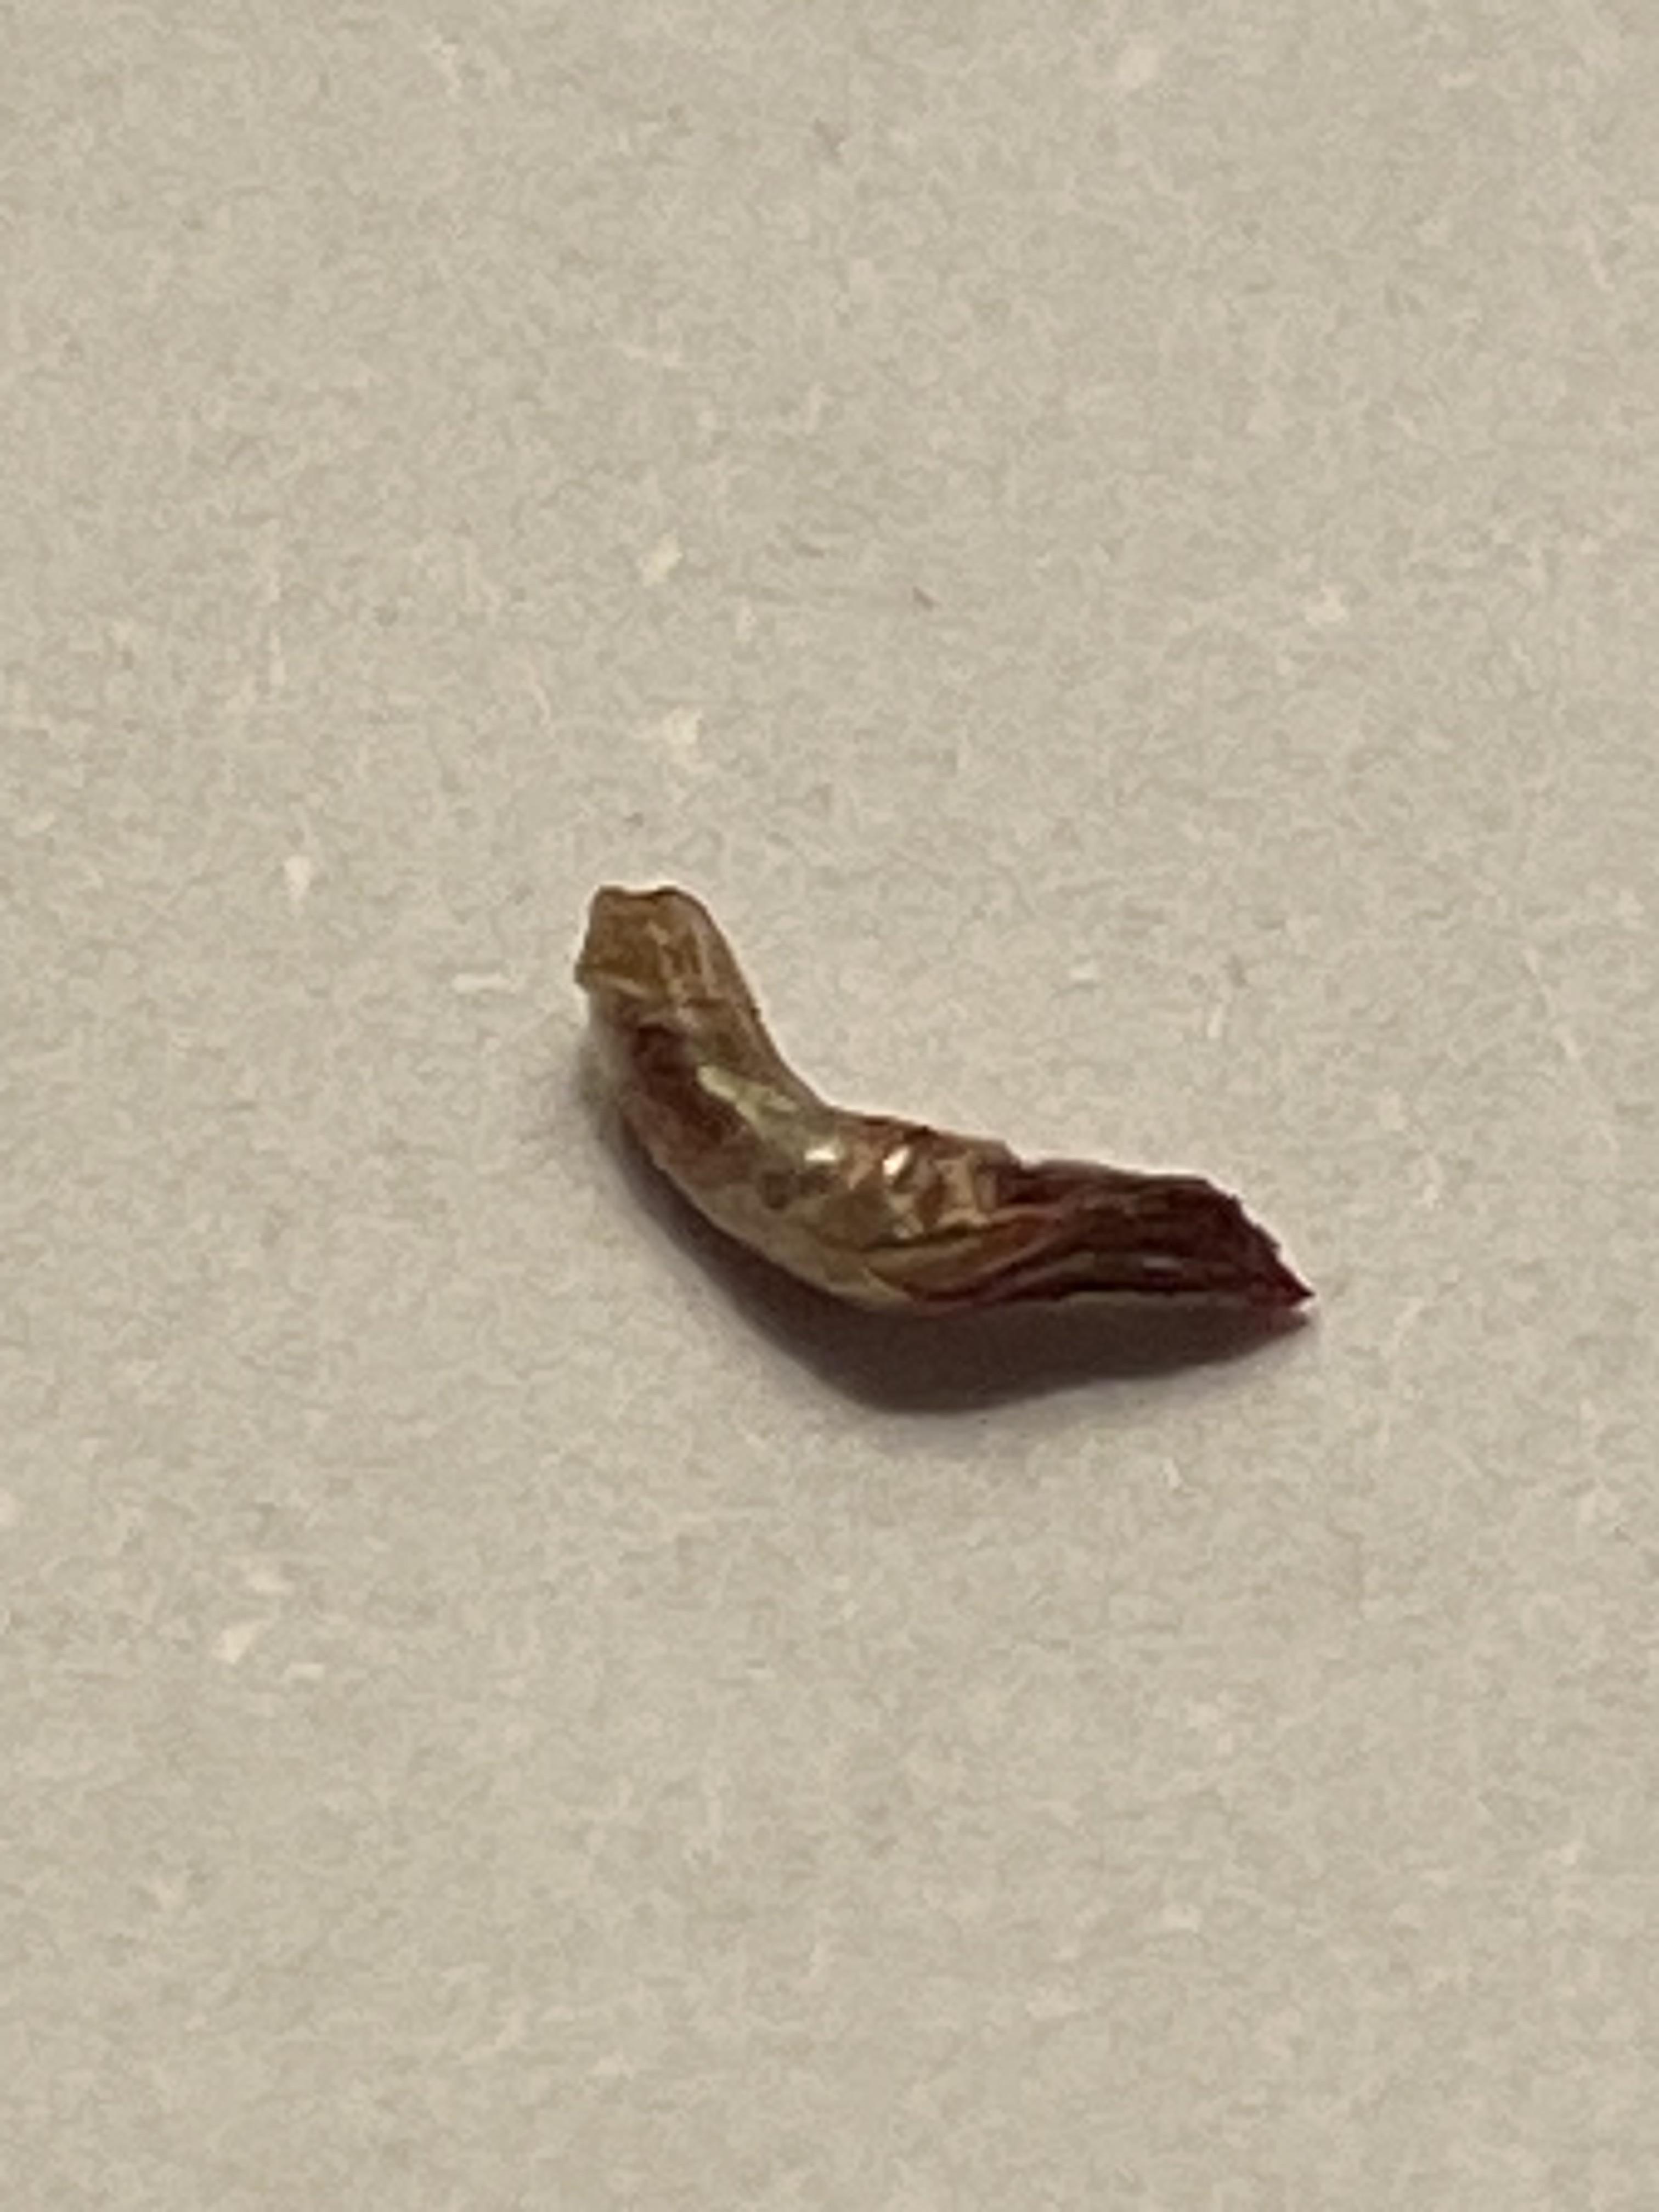 I have Pili Multigemini (multiple hairs growing out of one follicle). I  just popped this out of my chin. | Scrolller